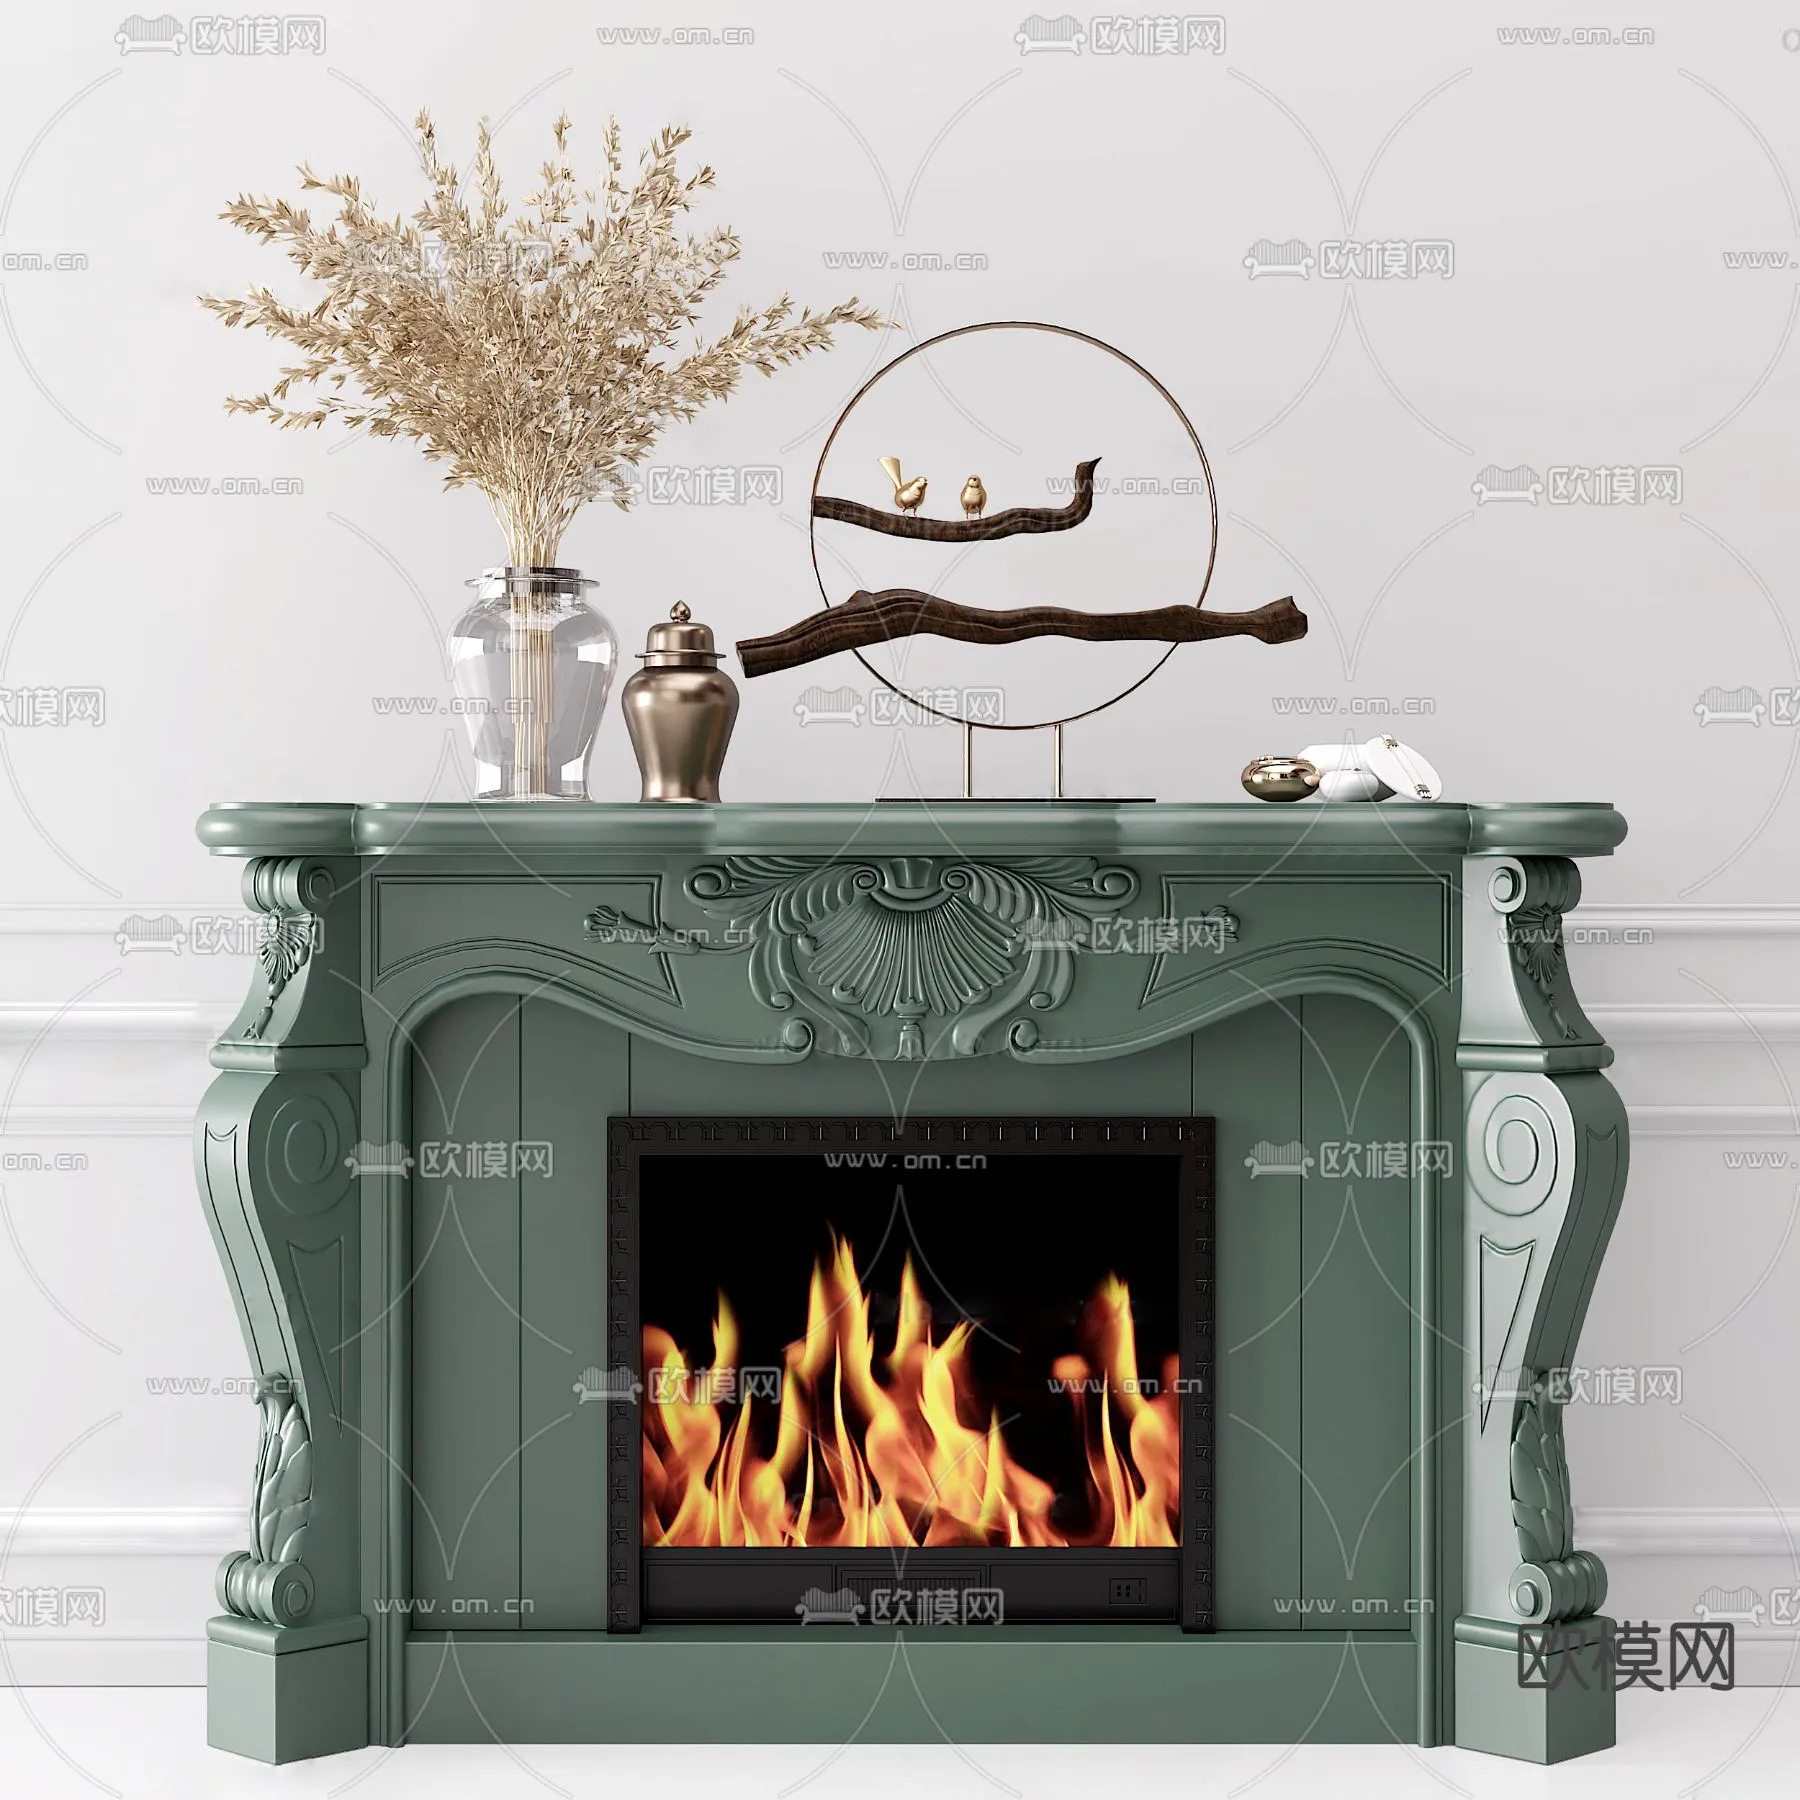 CLASSIC – FIREPLACE 3DMODELS – 087